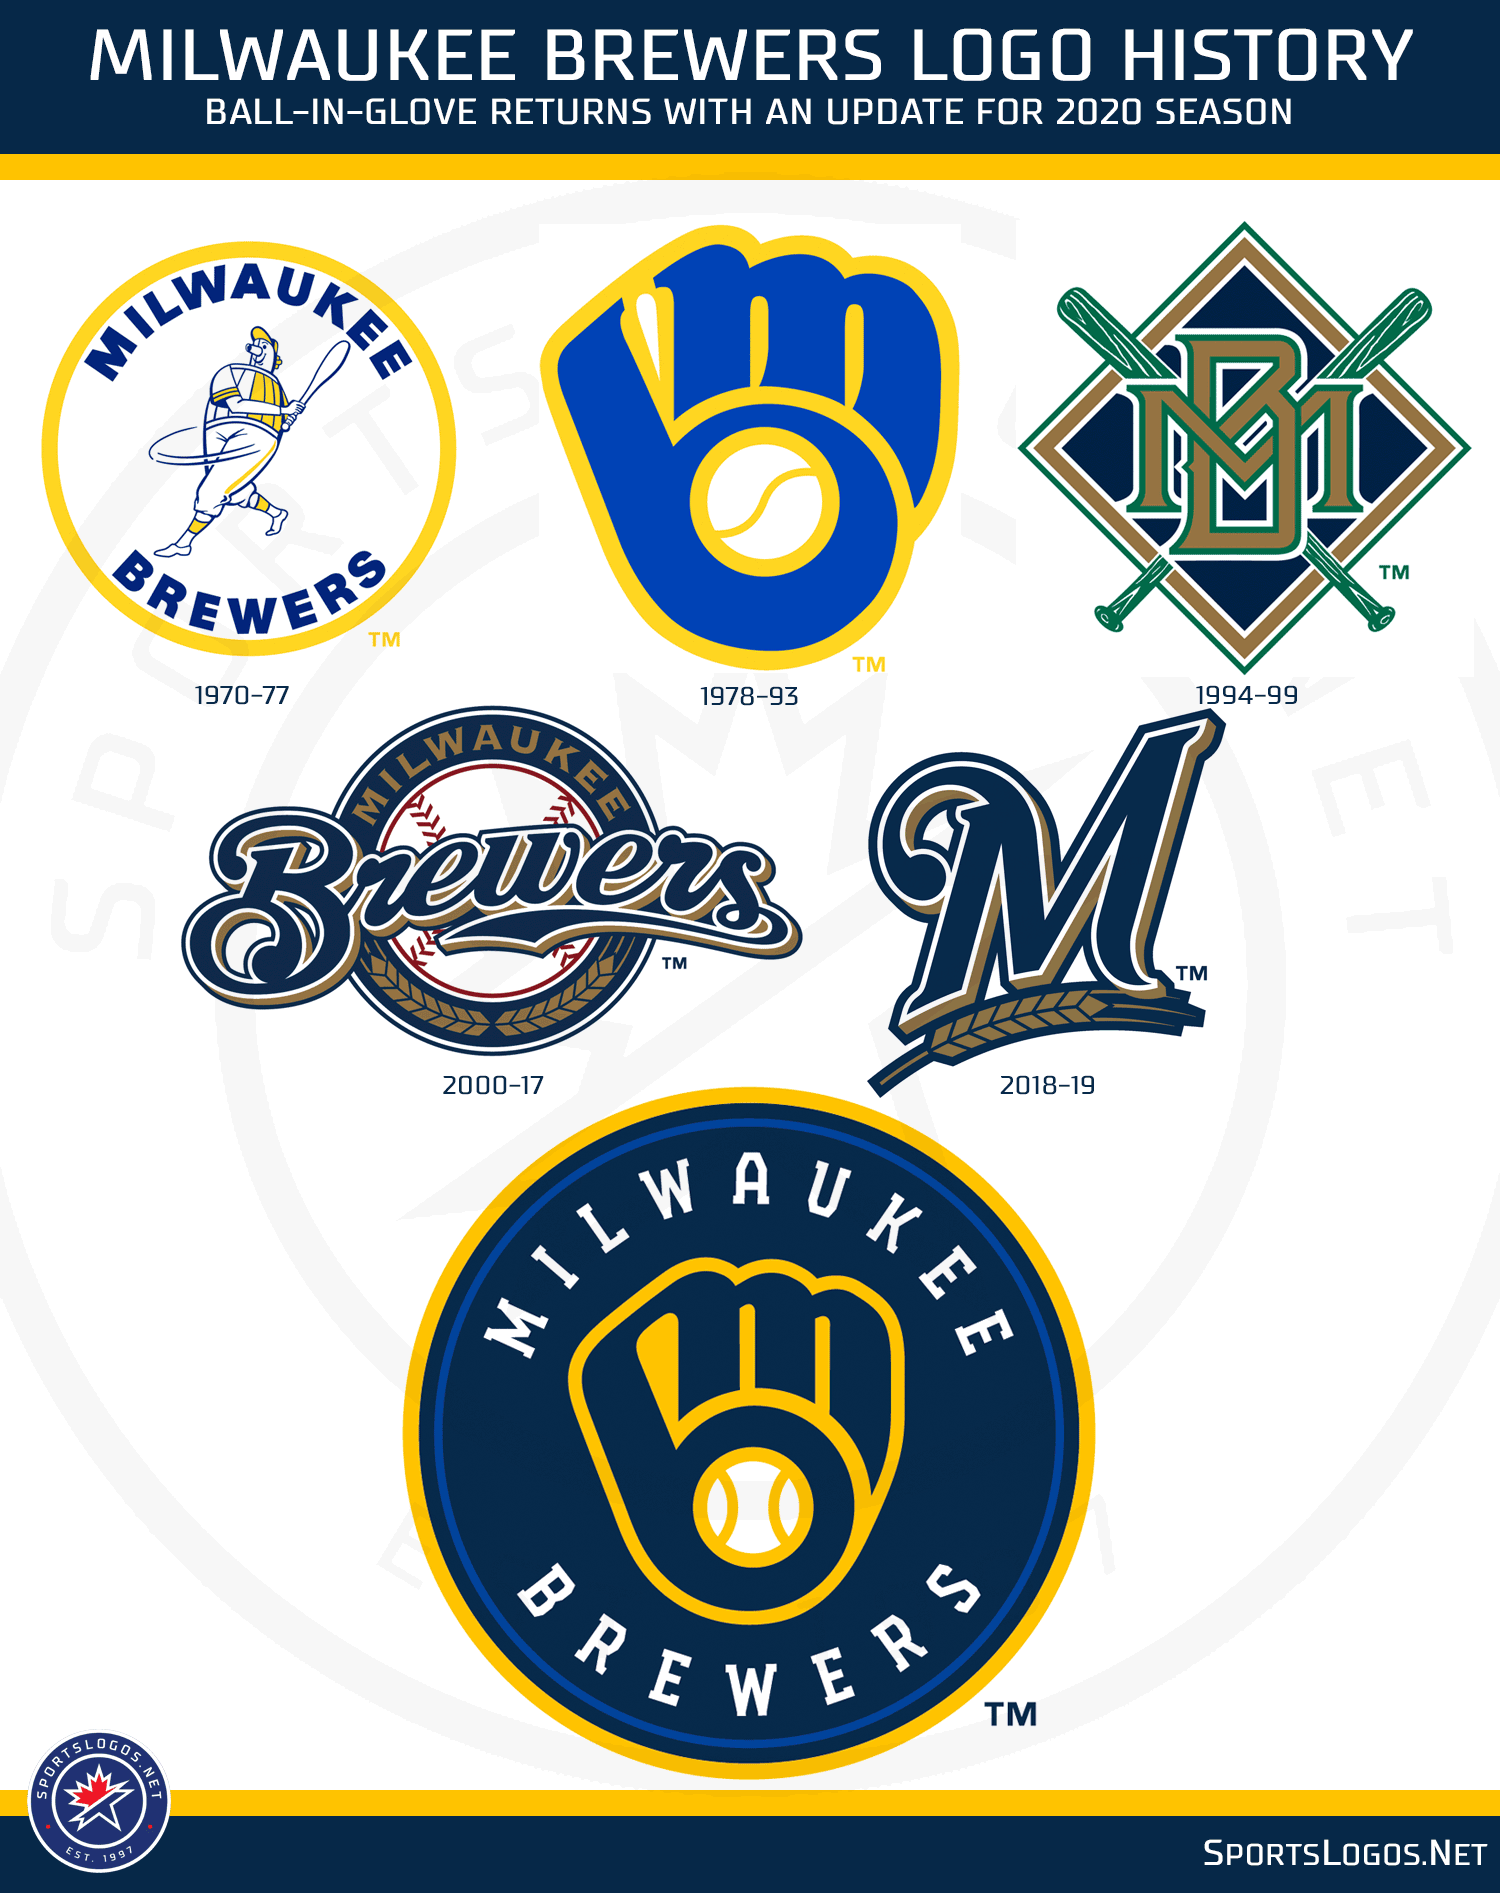 1994 brewers jersey